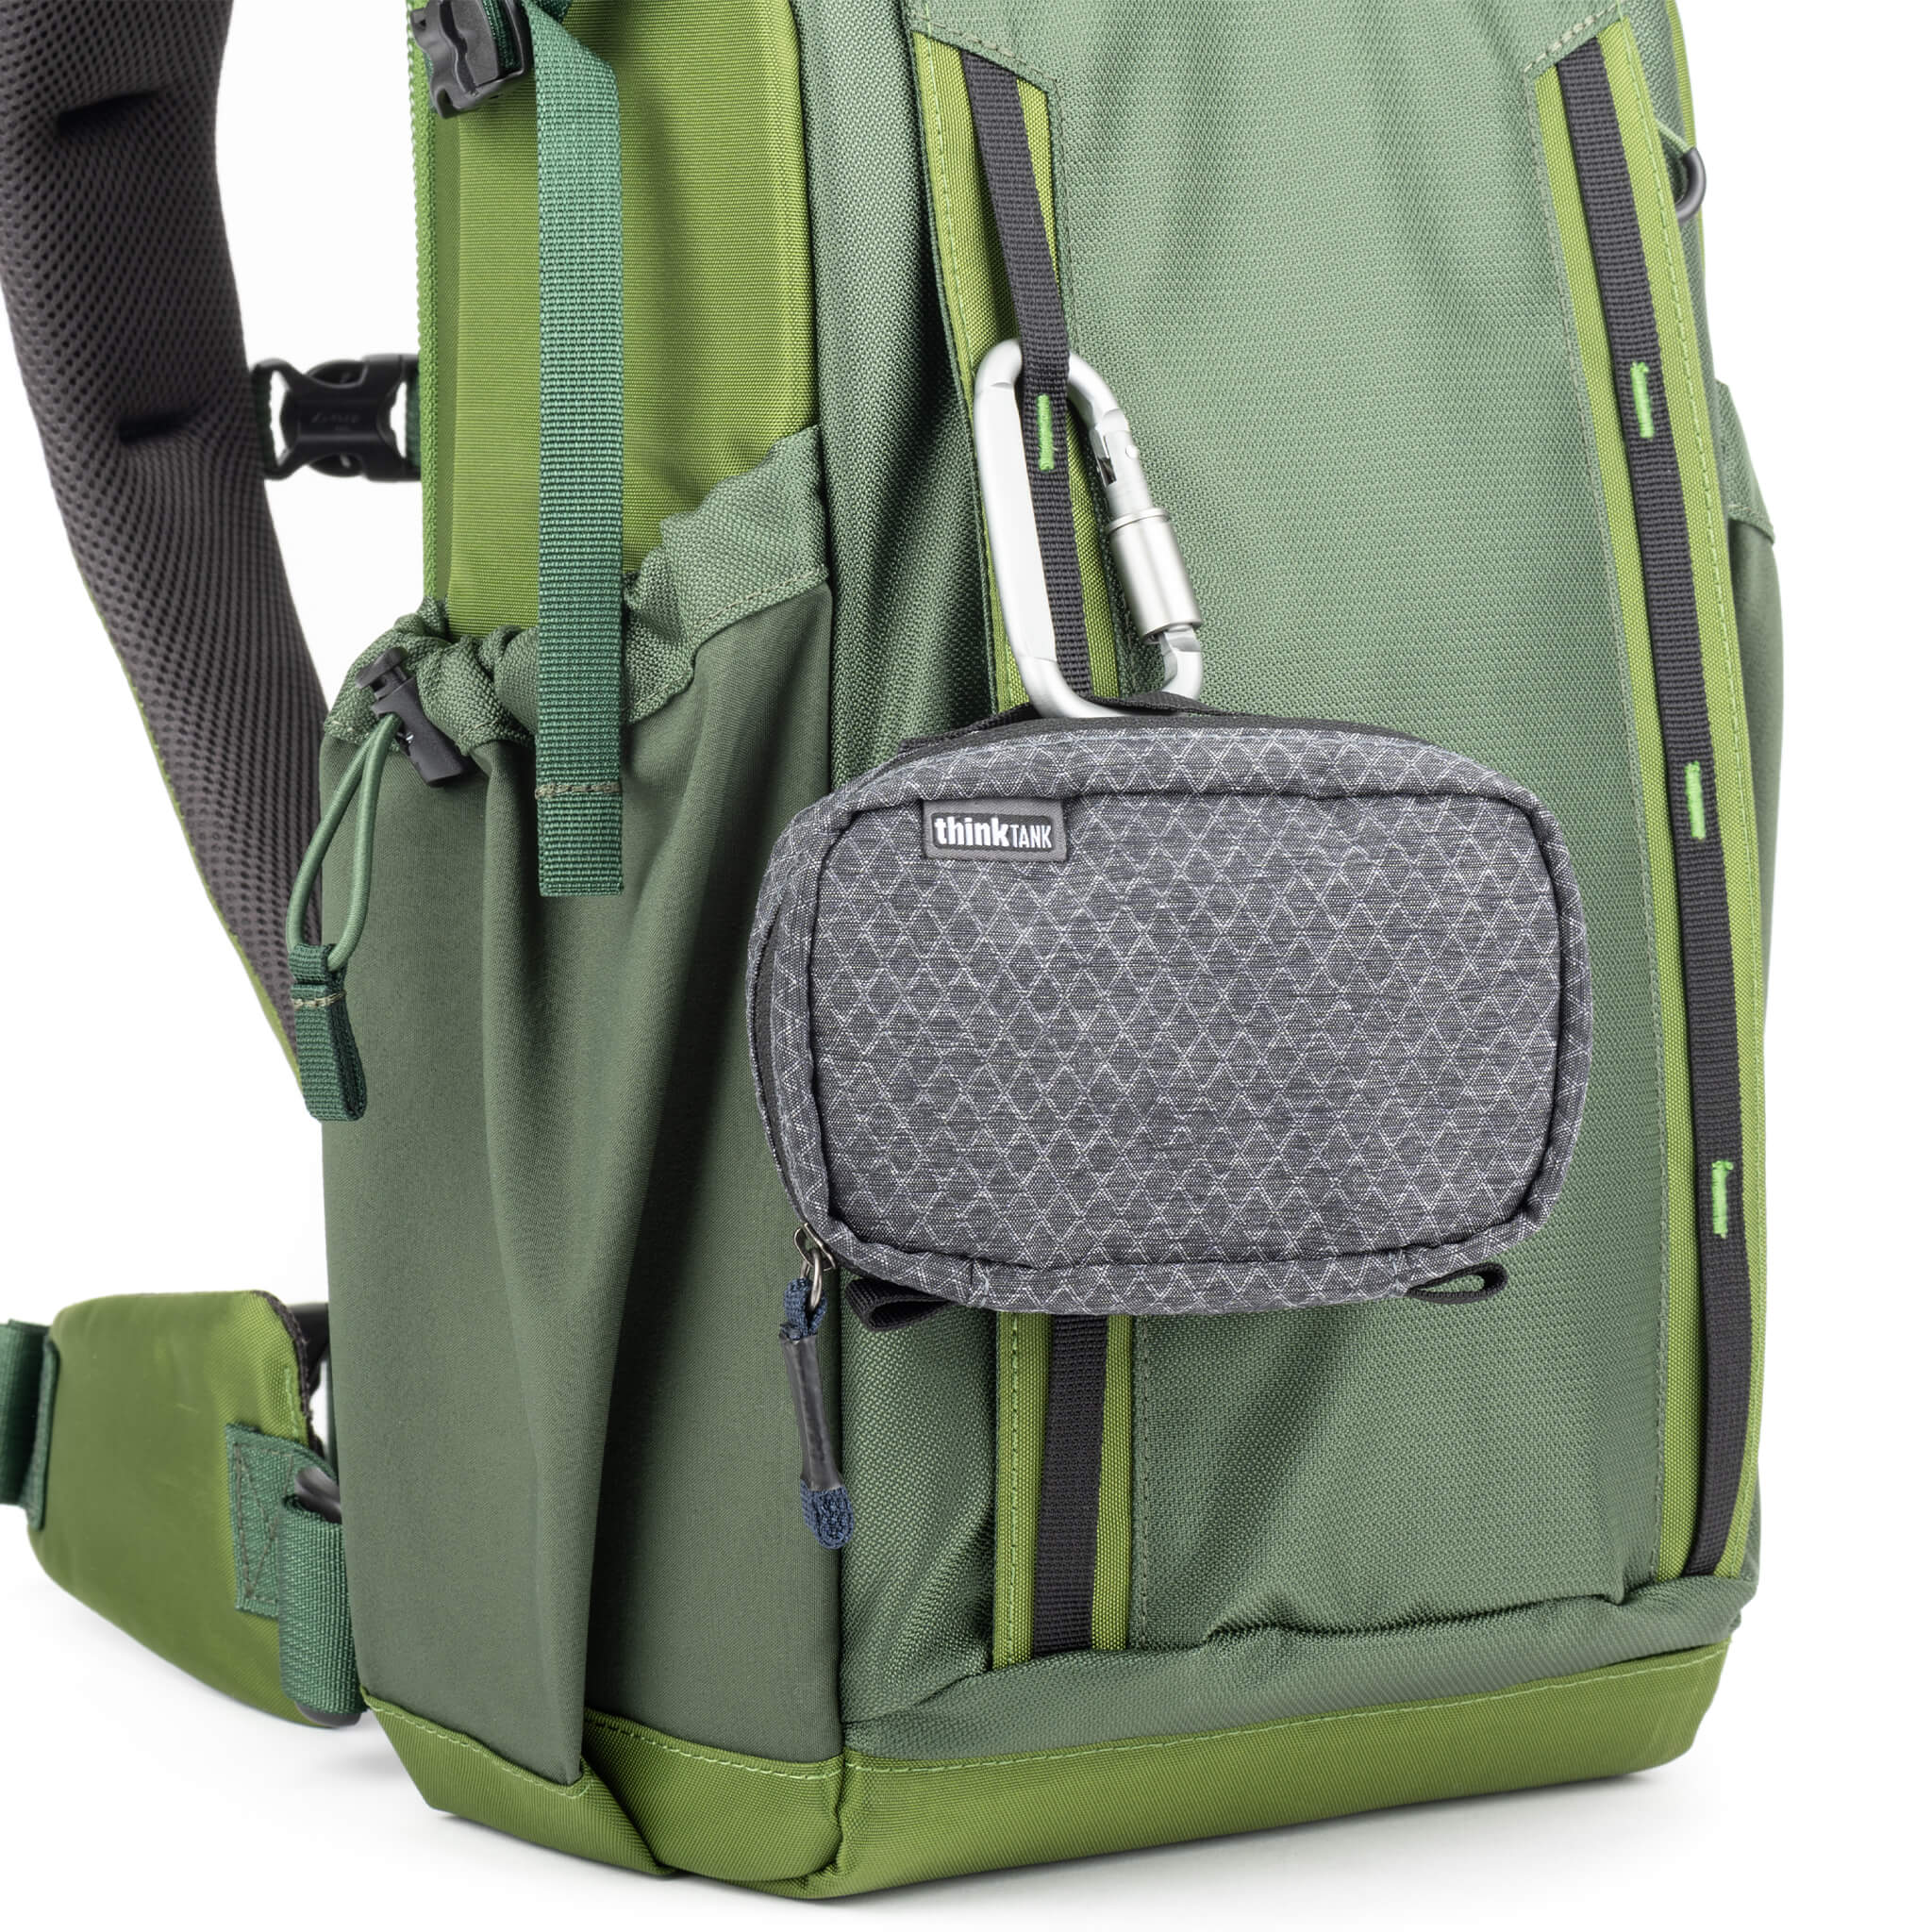 Dual vertical daisy chains on the front pocket add functionality and external carry capacity